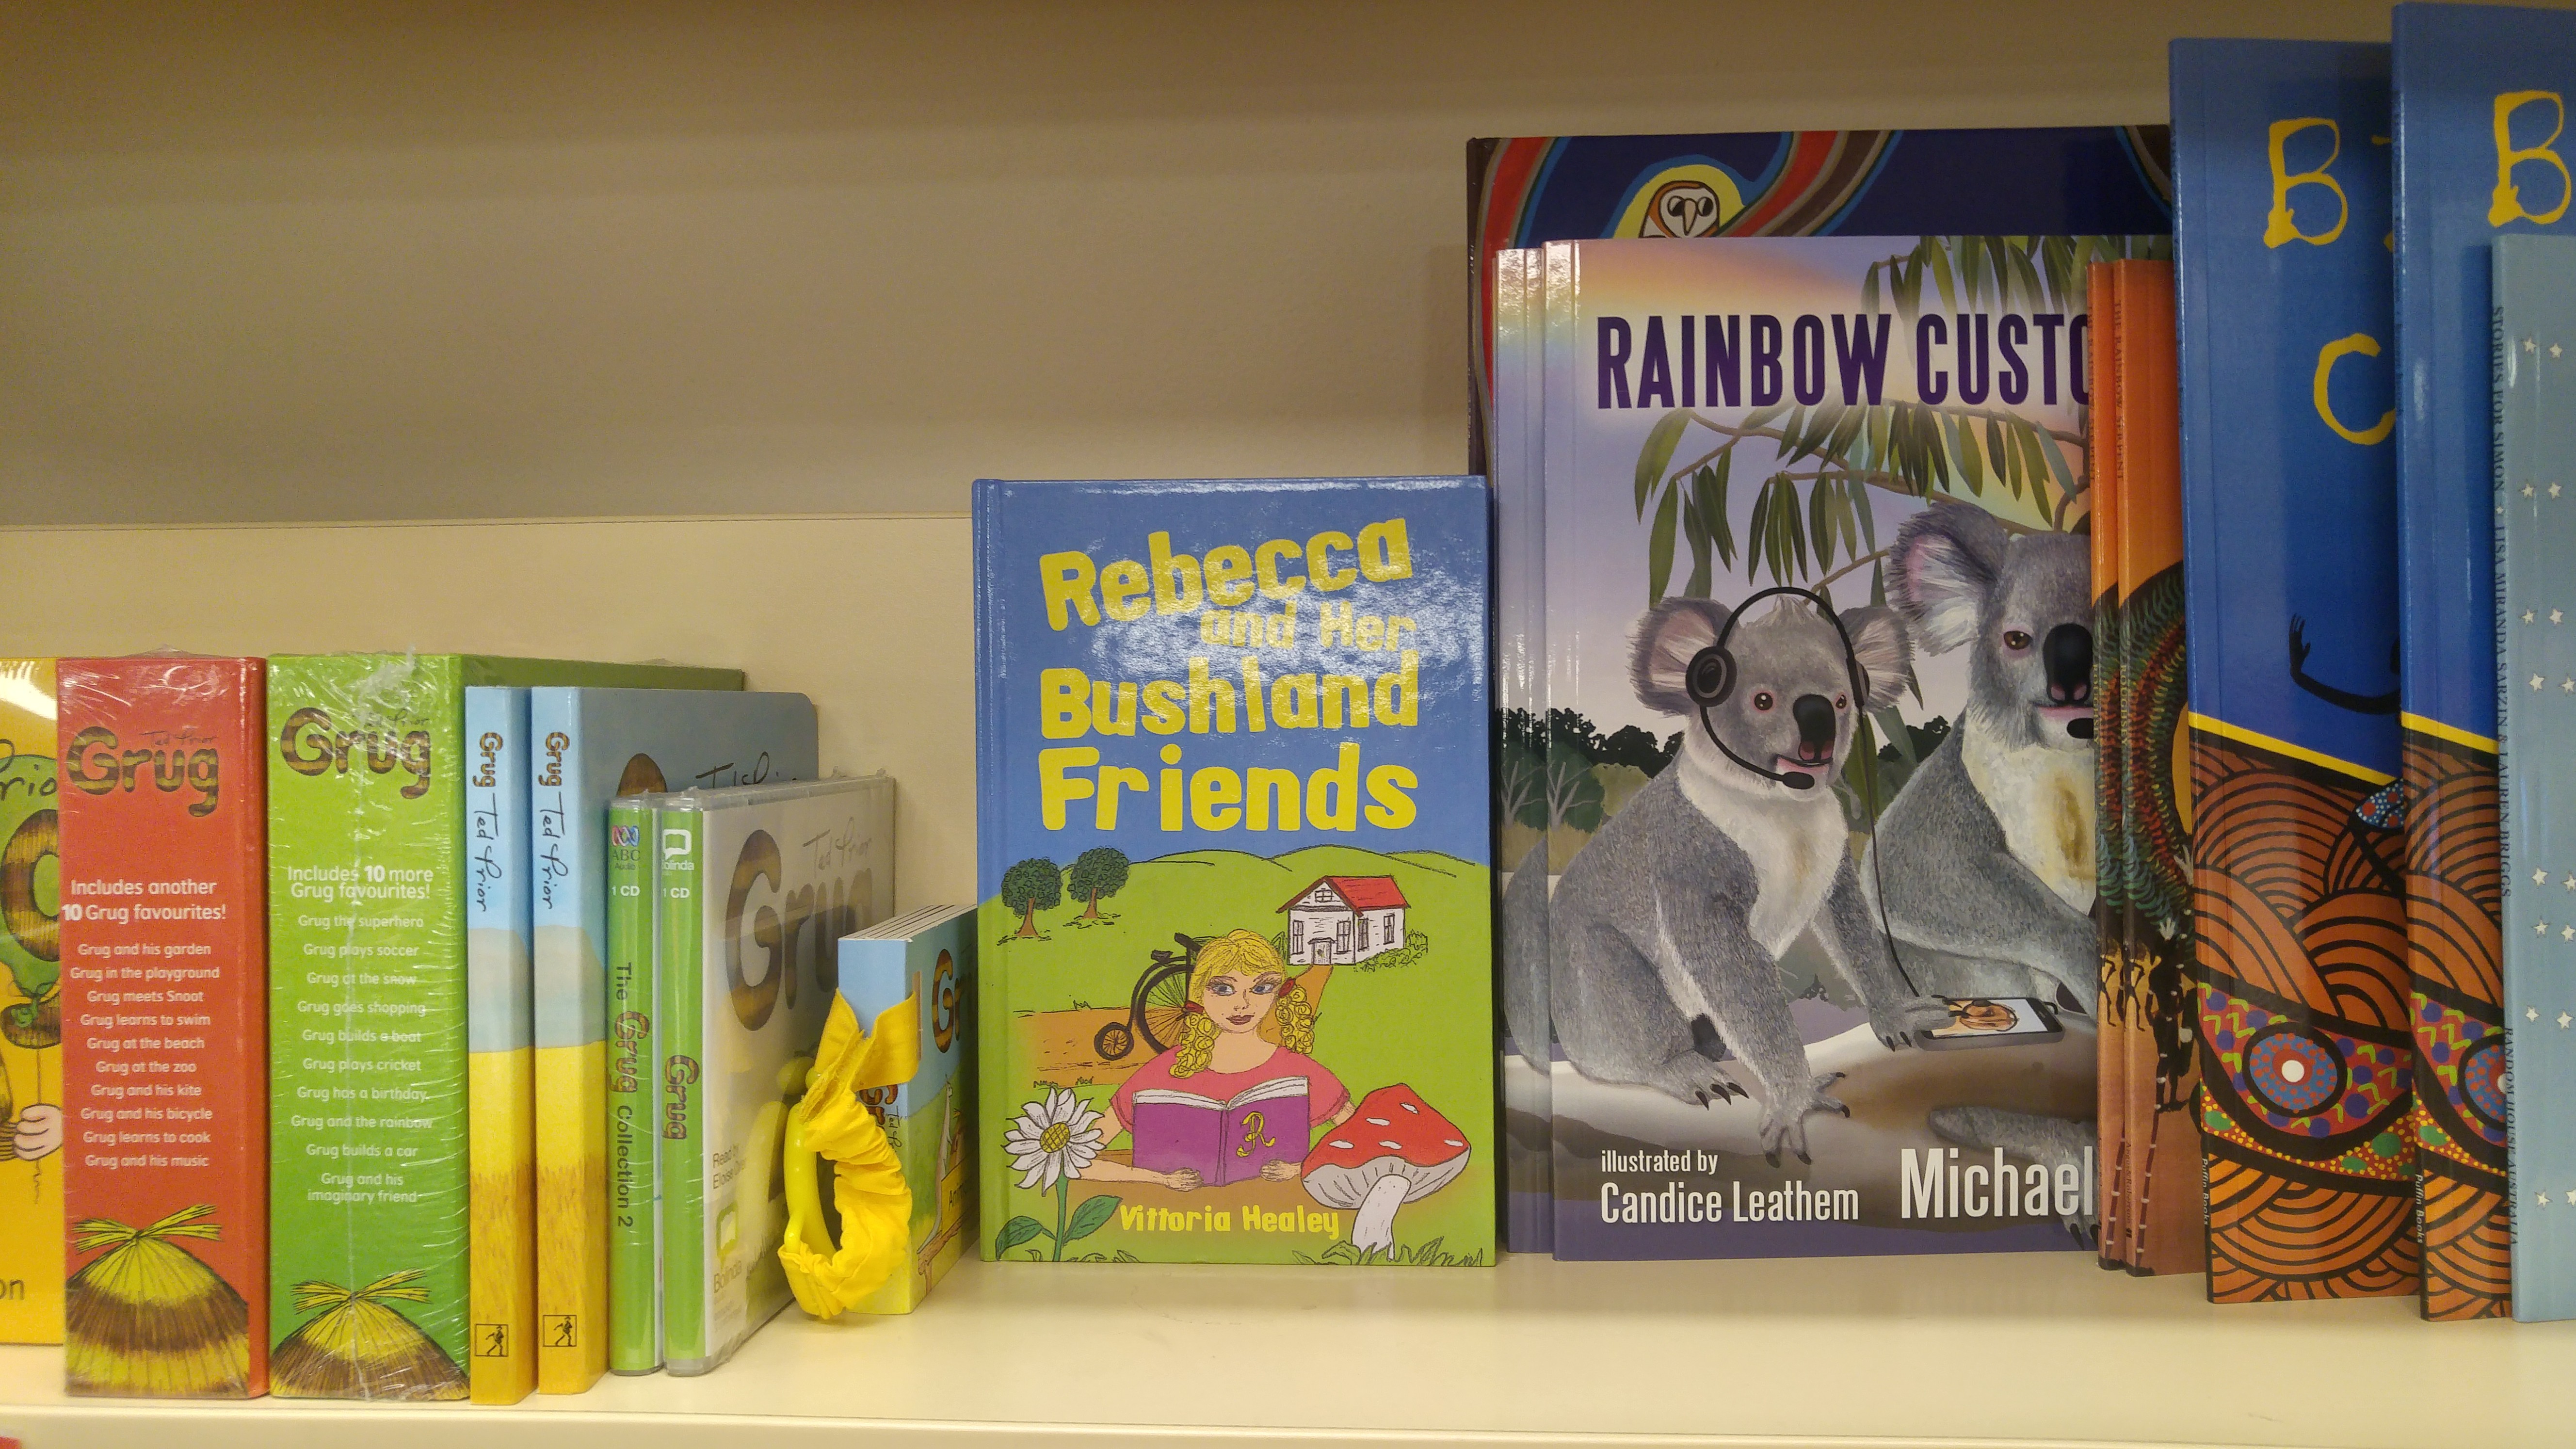 ‘Rebecca and Her Bushland Friends’ is now available in Adelaide